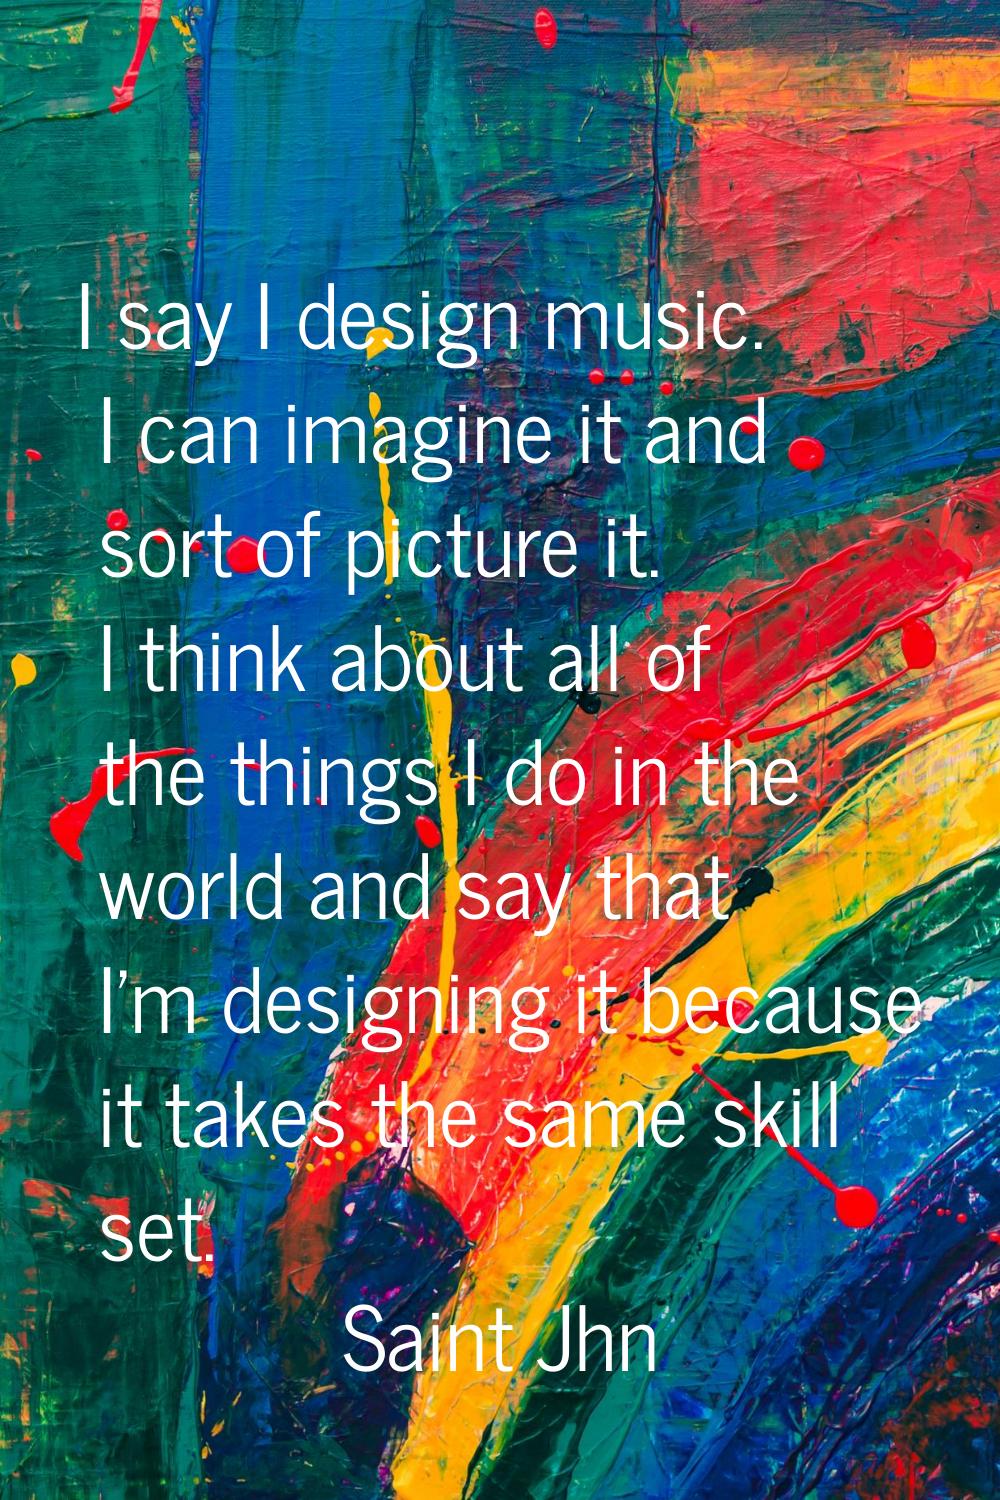 I say I design music. I can imagine it and sort of picture it. I think about all of the things I do